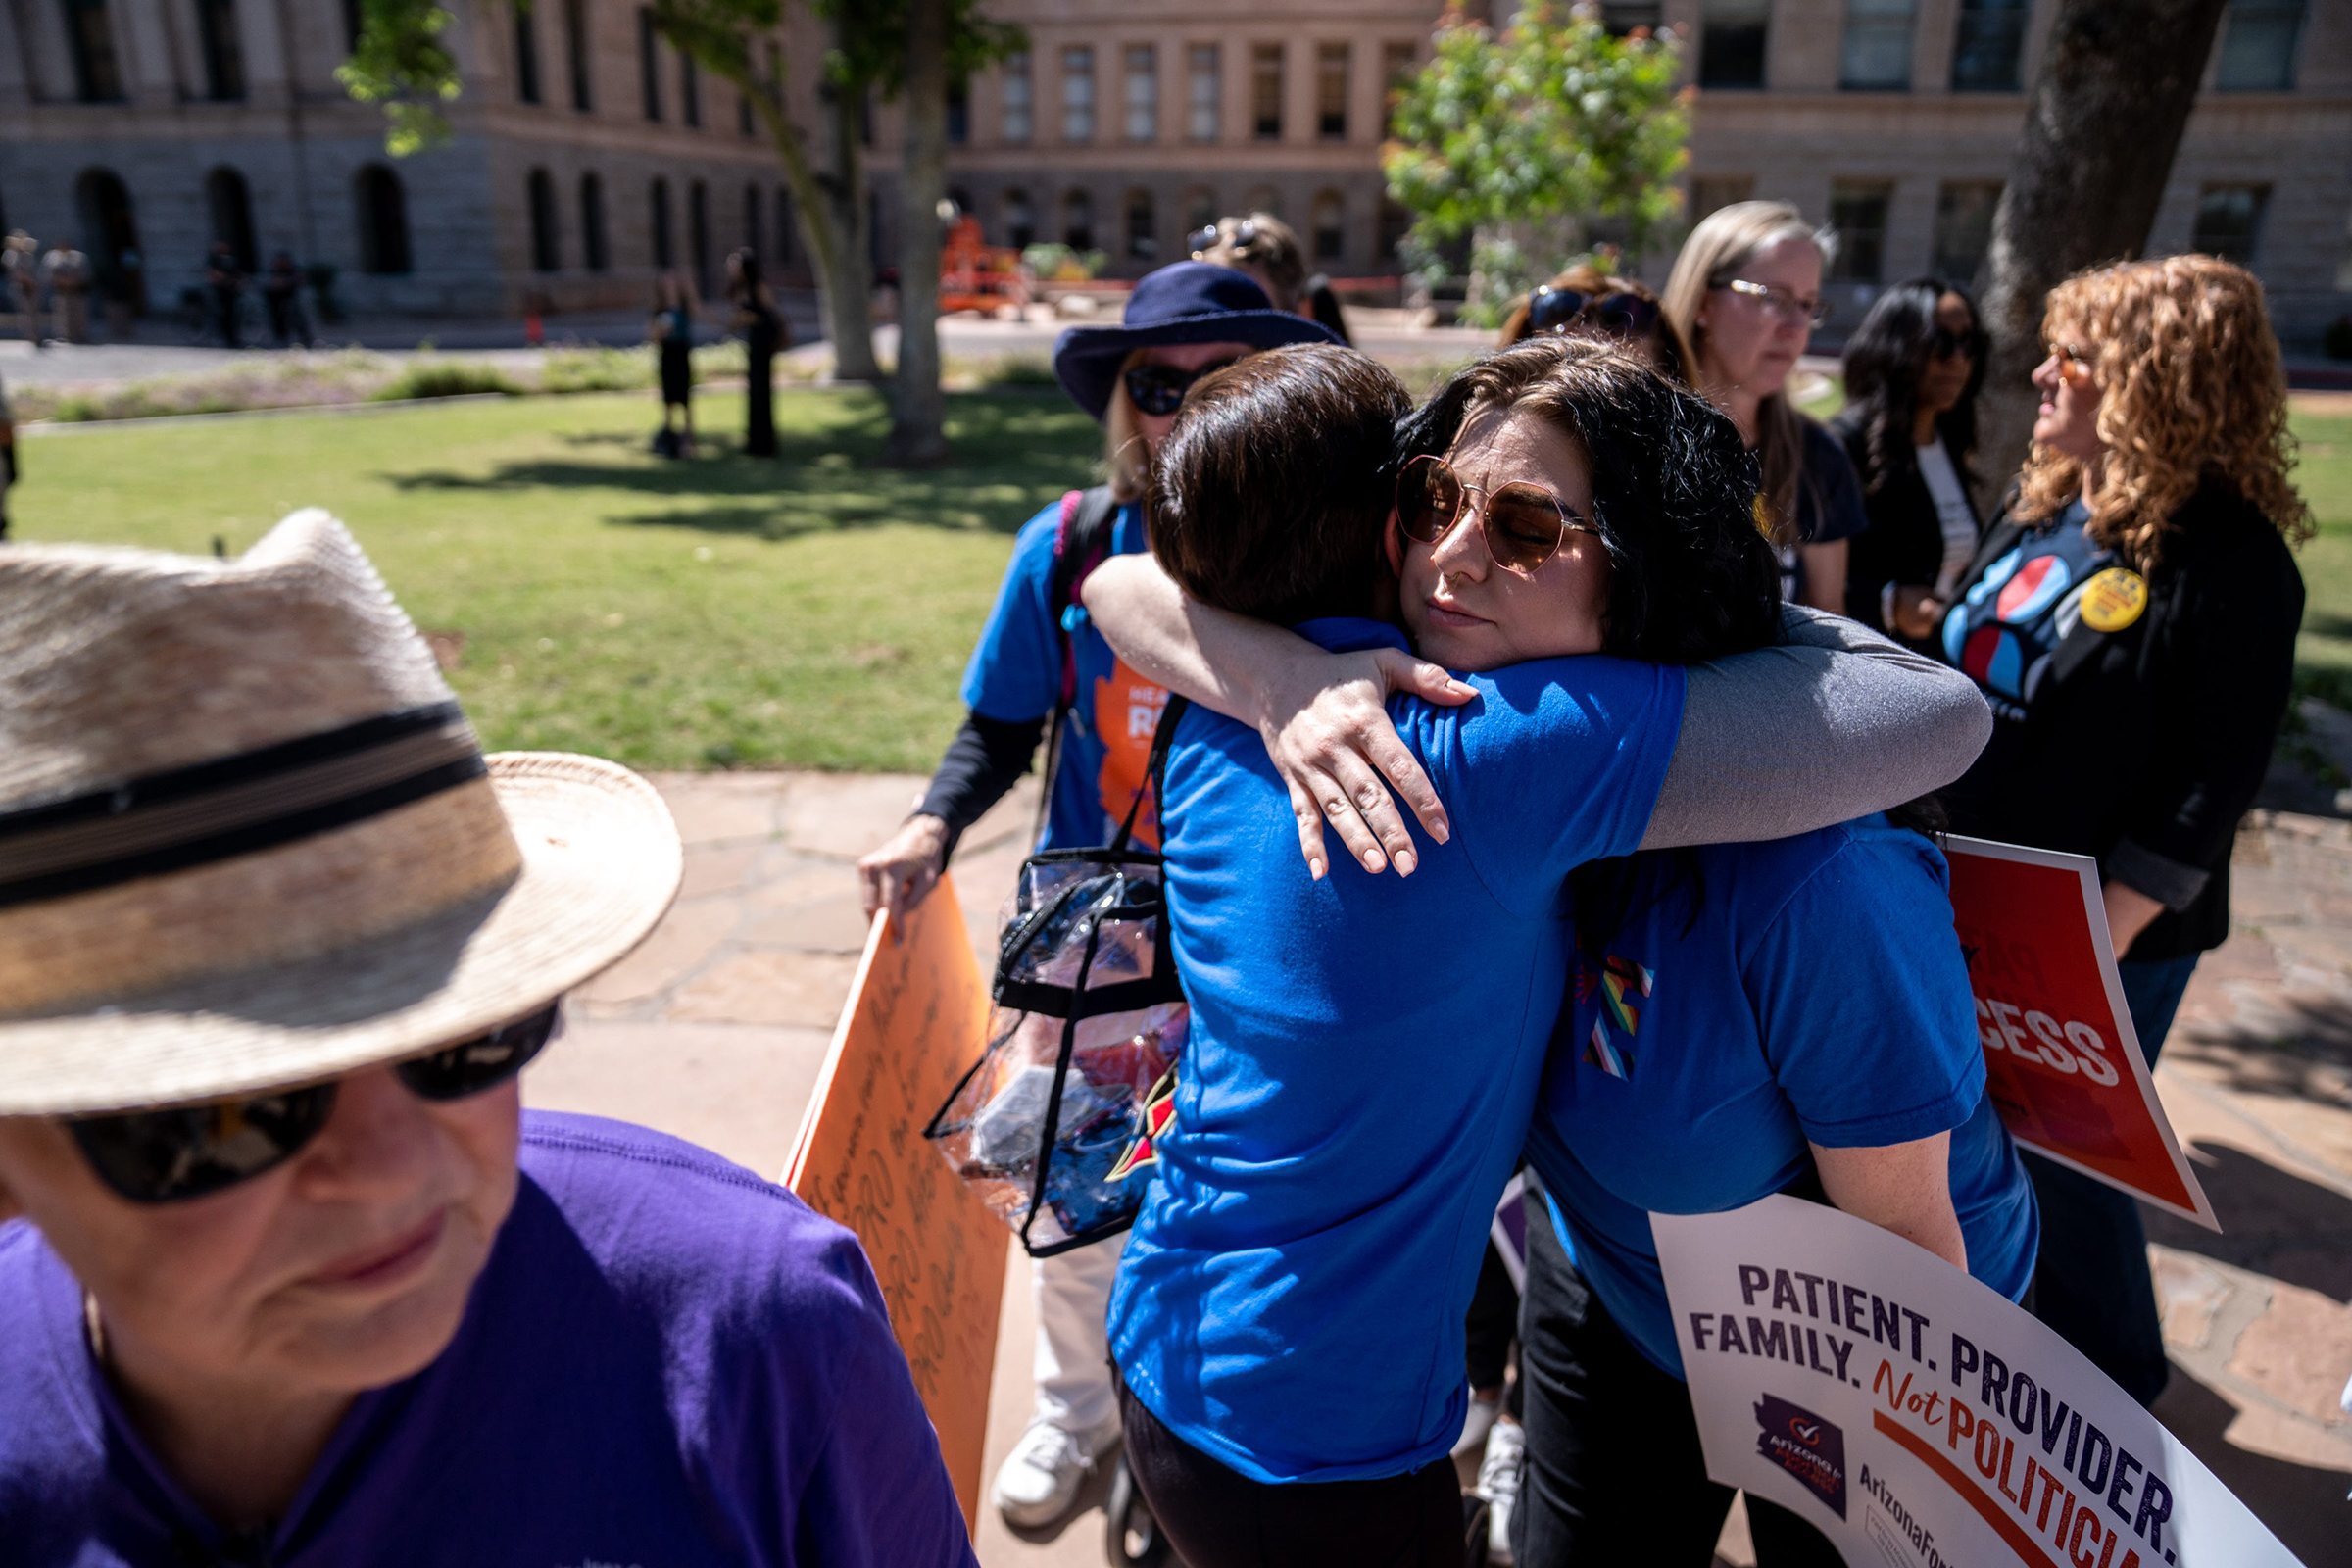 Abortion rights activists Marion Weich hugs Carolyn LaMantia during a news conference addressing the Arizona Supreme Court's ruling to uphold a 160-year-old near-total abortion ban at the Arizona state Capitol in Phoenix on April 9.